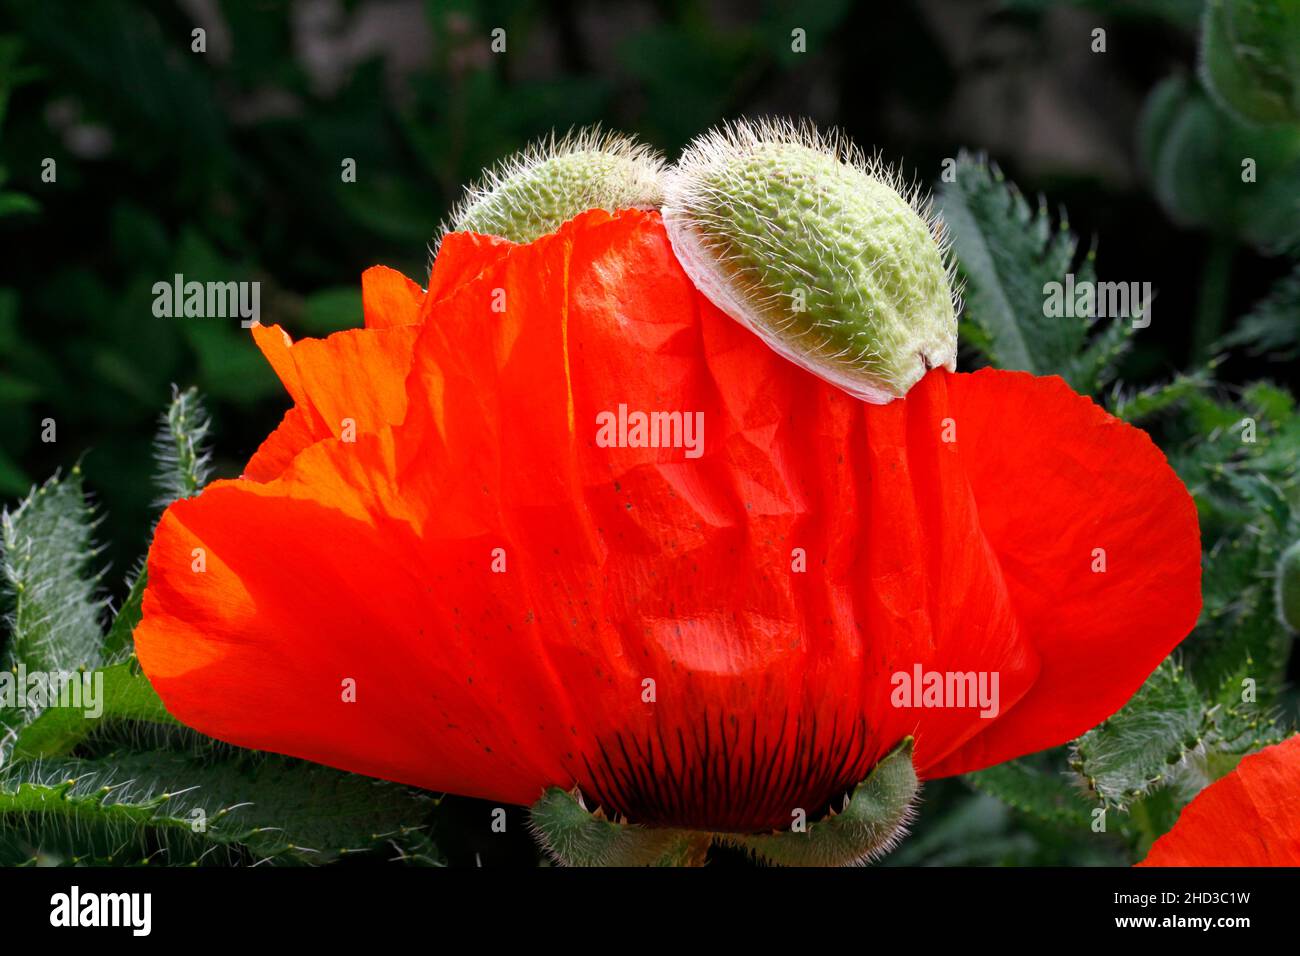 A red poppy (papaver rhoeas) with its petals just unfurling and its sepals still attached in a garden in Nanaimo, Vancouver Island, BC, Canada in May Stock Photo